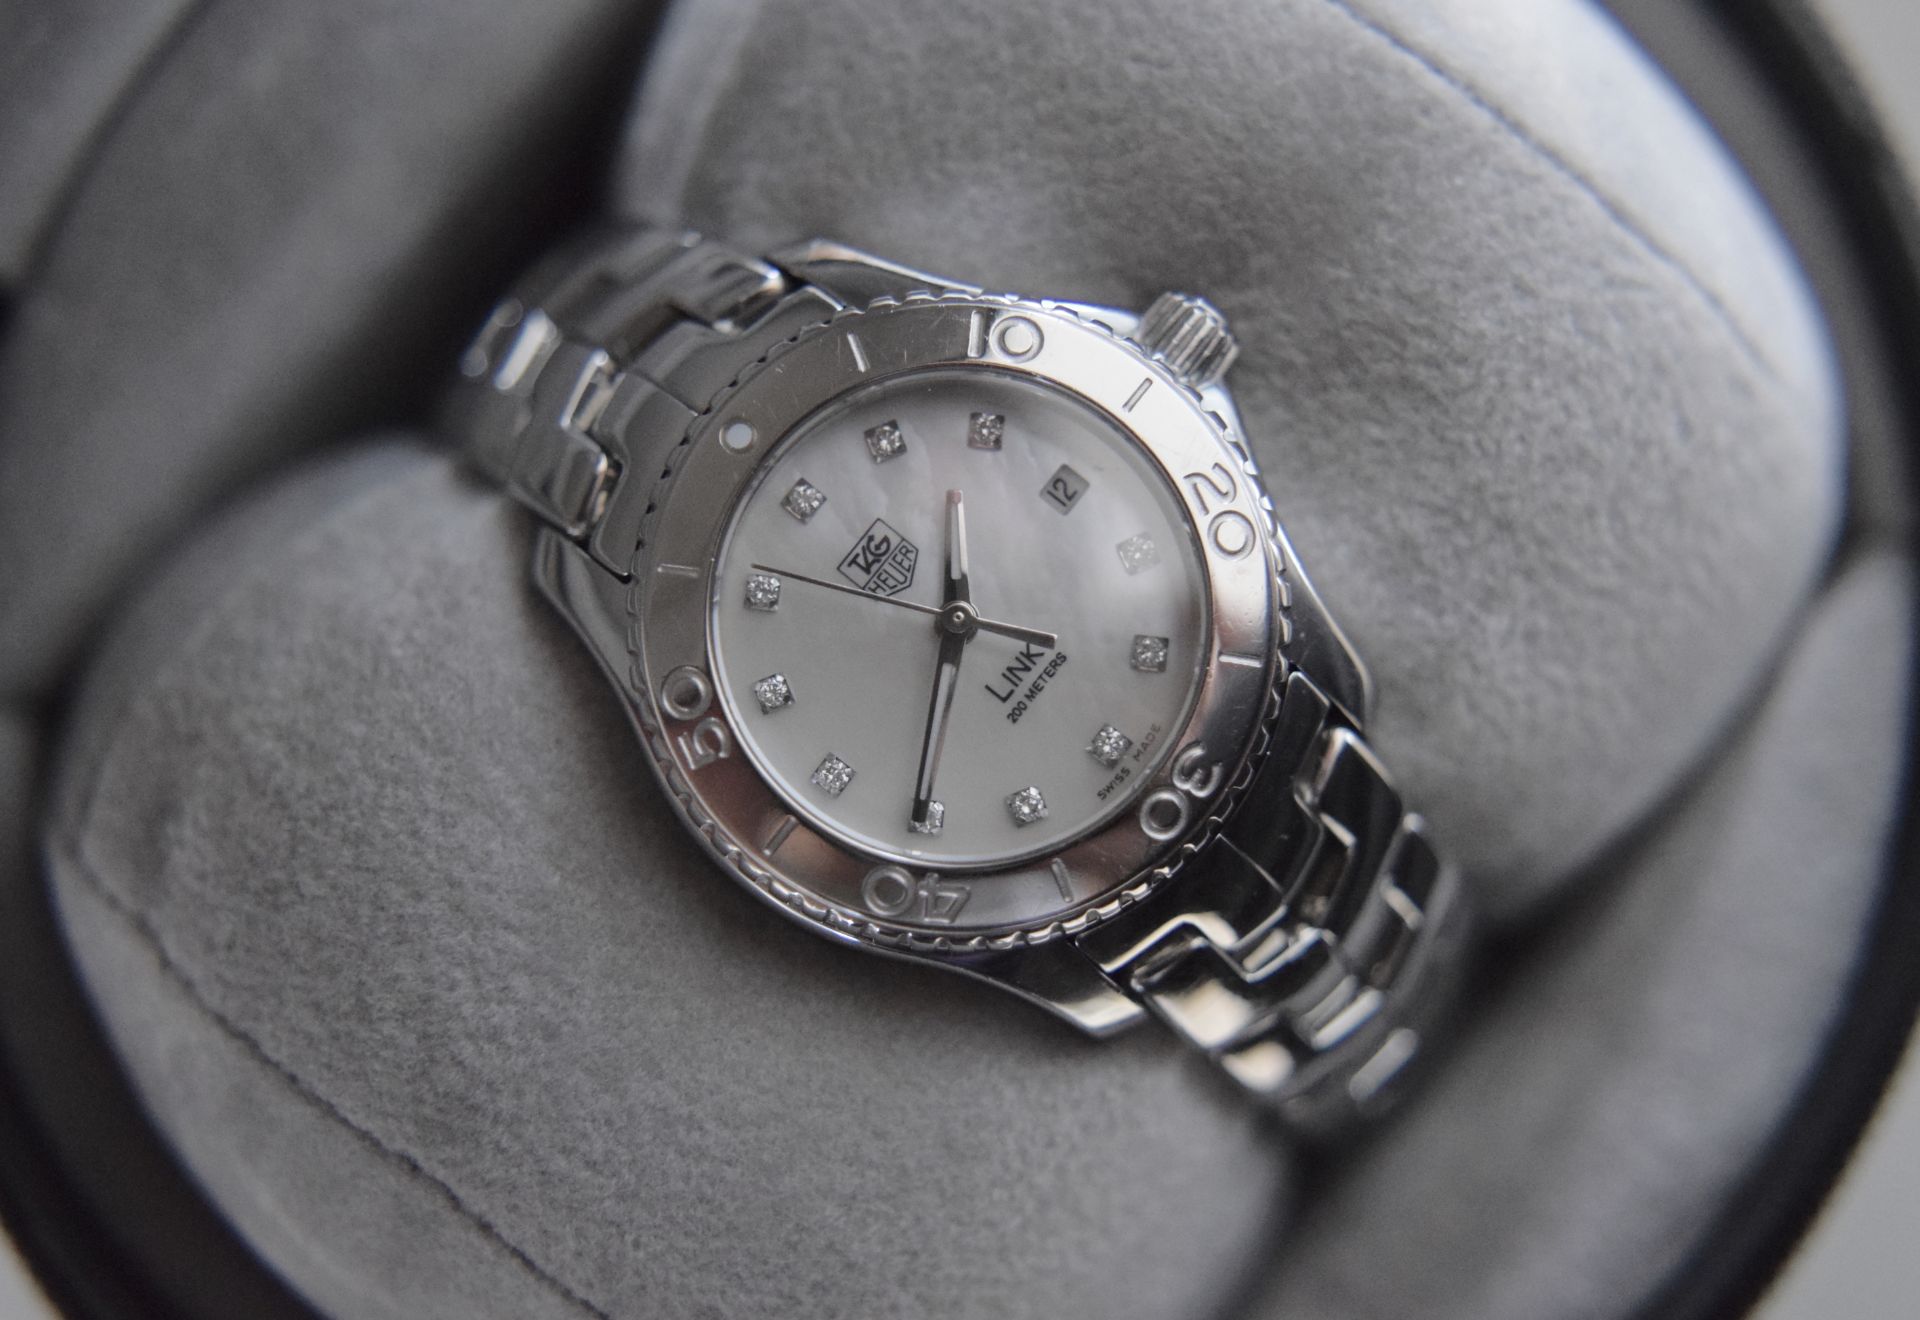 TAG HEUER BEAUTIFUL LADIES DIAMOND SET MOTHER OF PEARL DIAL WATCH (BOX, CARD, TAG, BOOKLETS ETC)